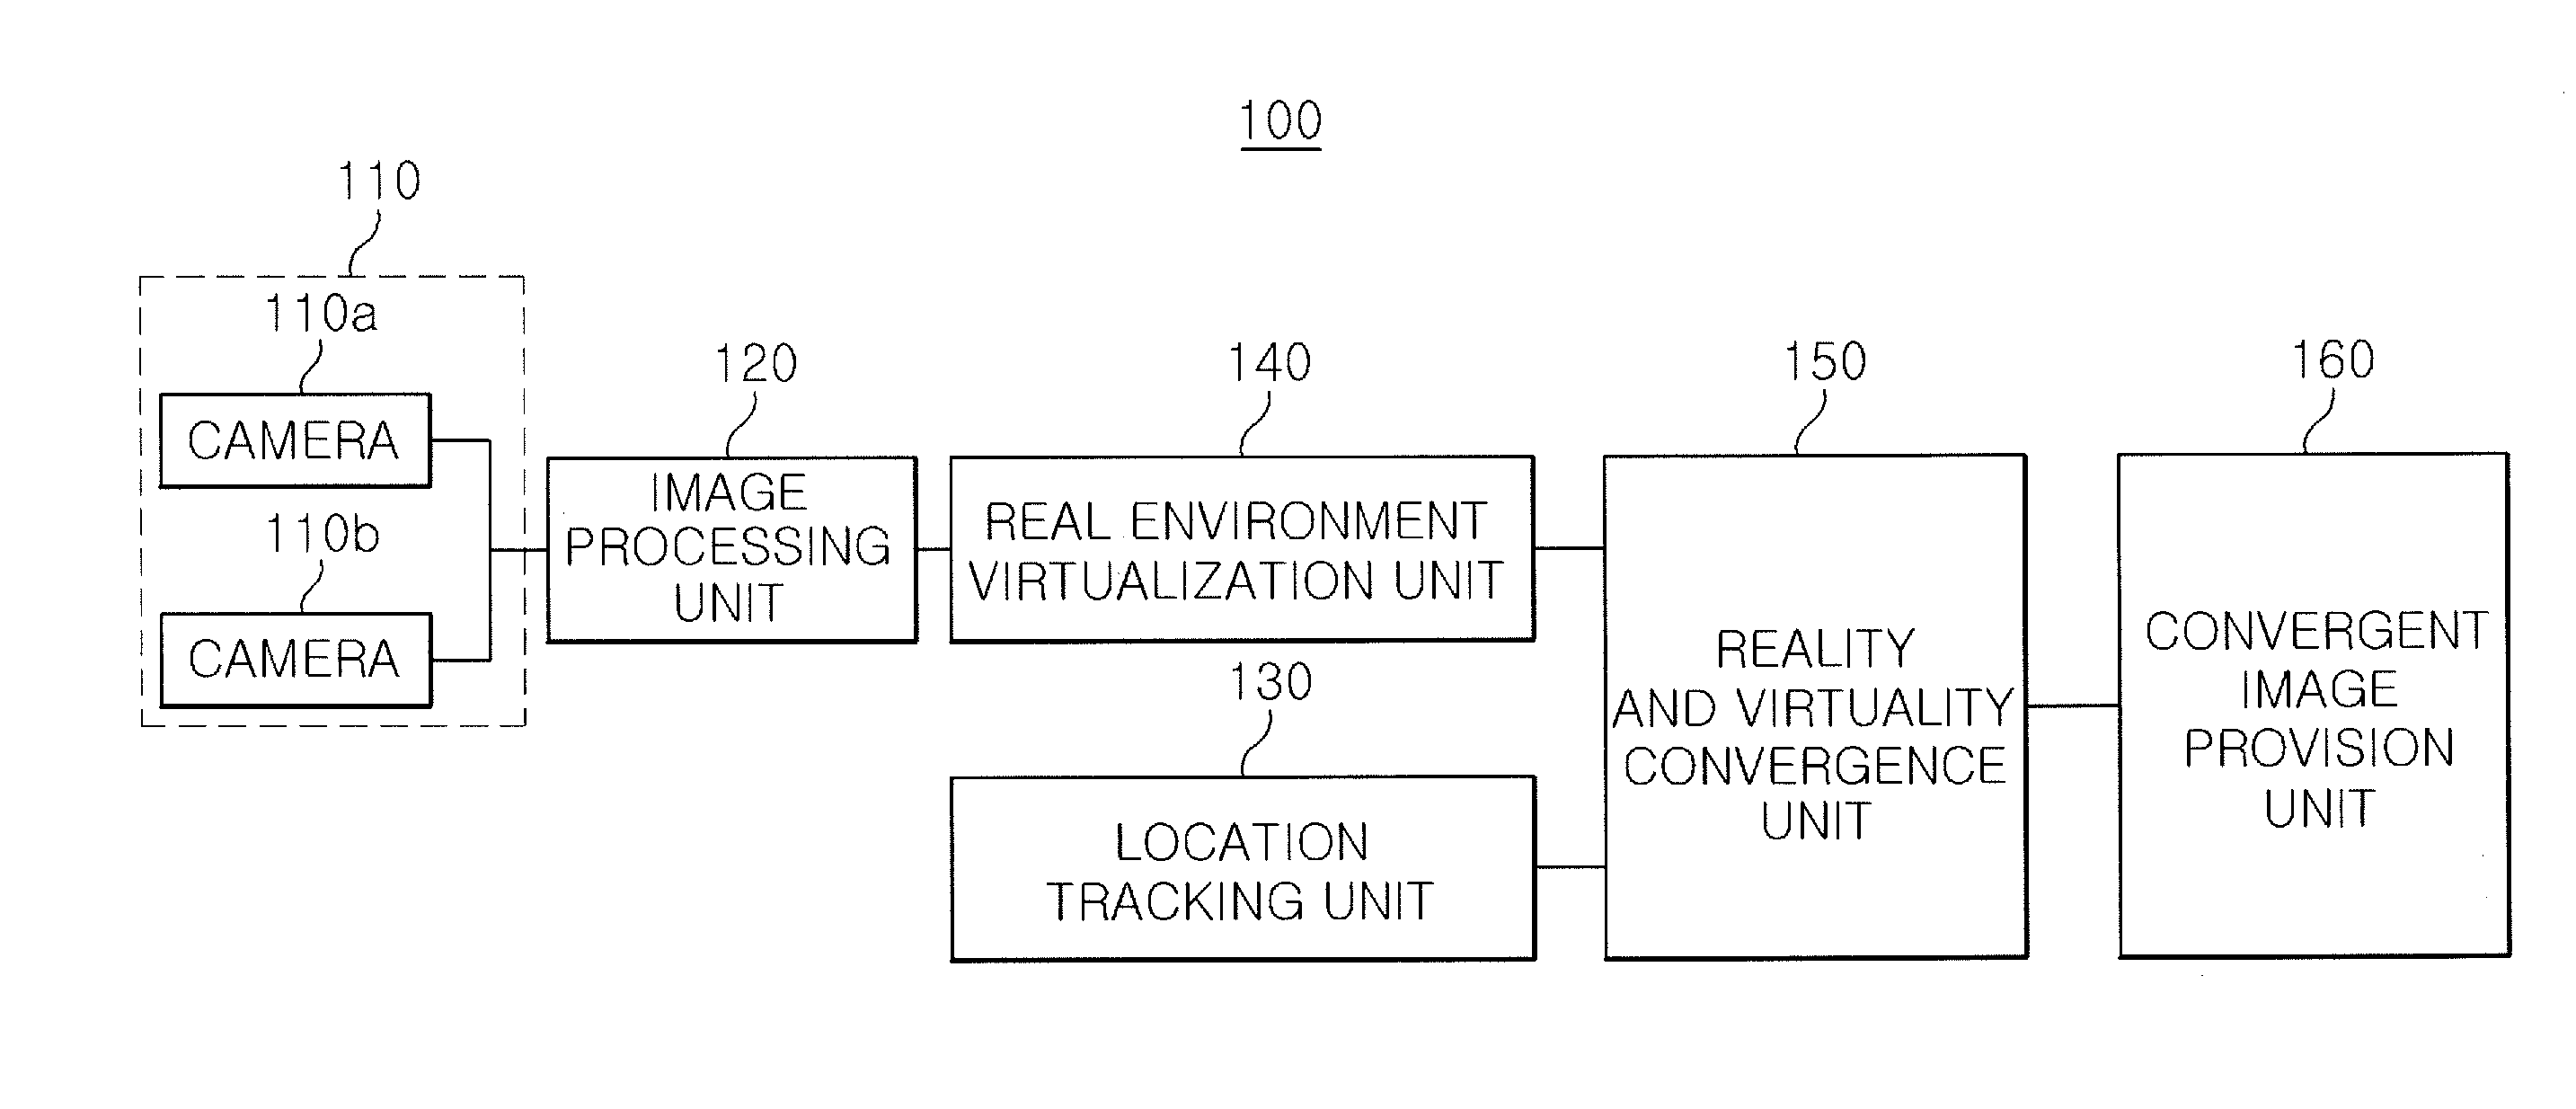 Apparatus and method for converging reality and virtuality in a mobile environment